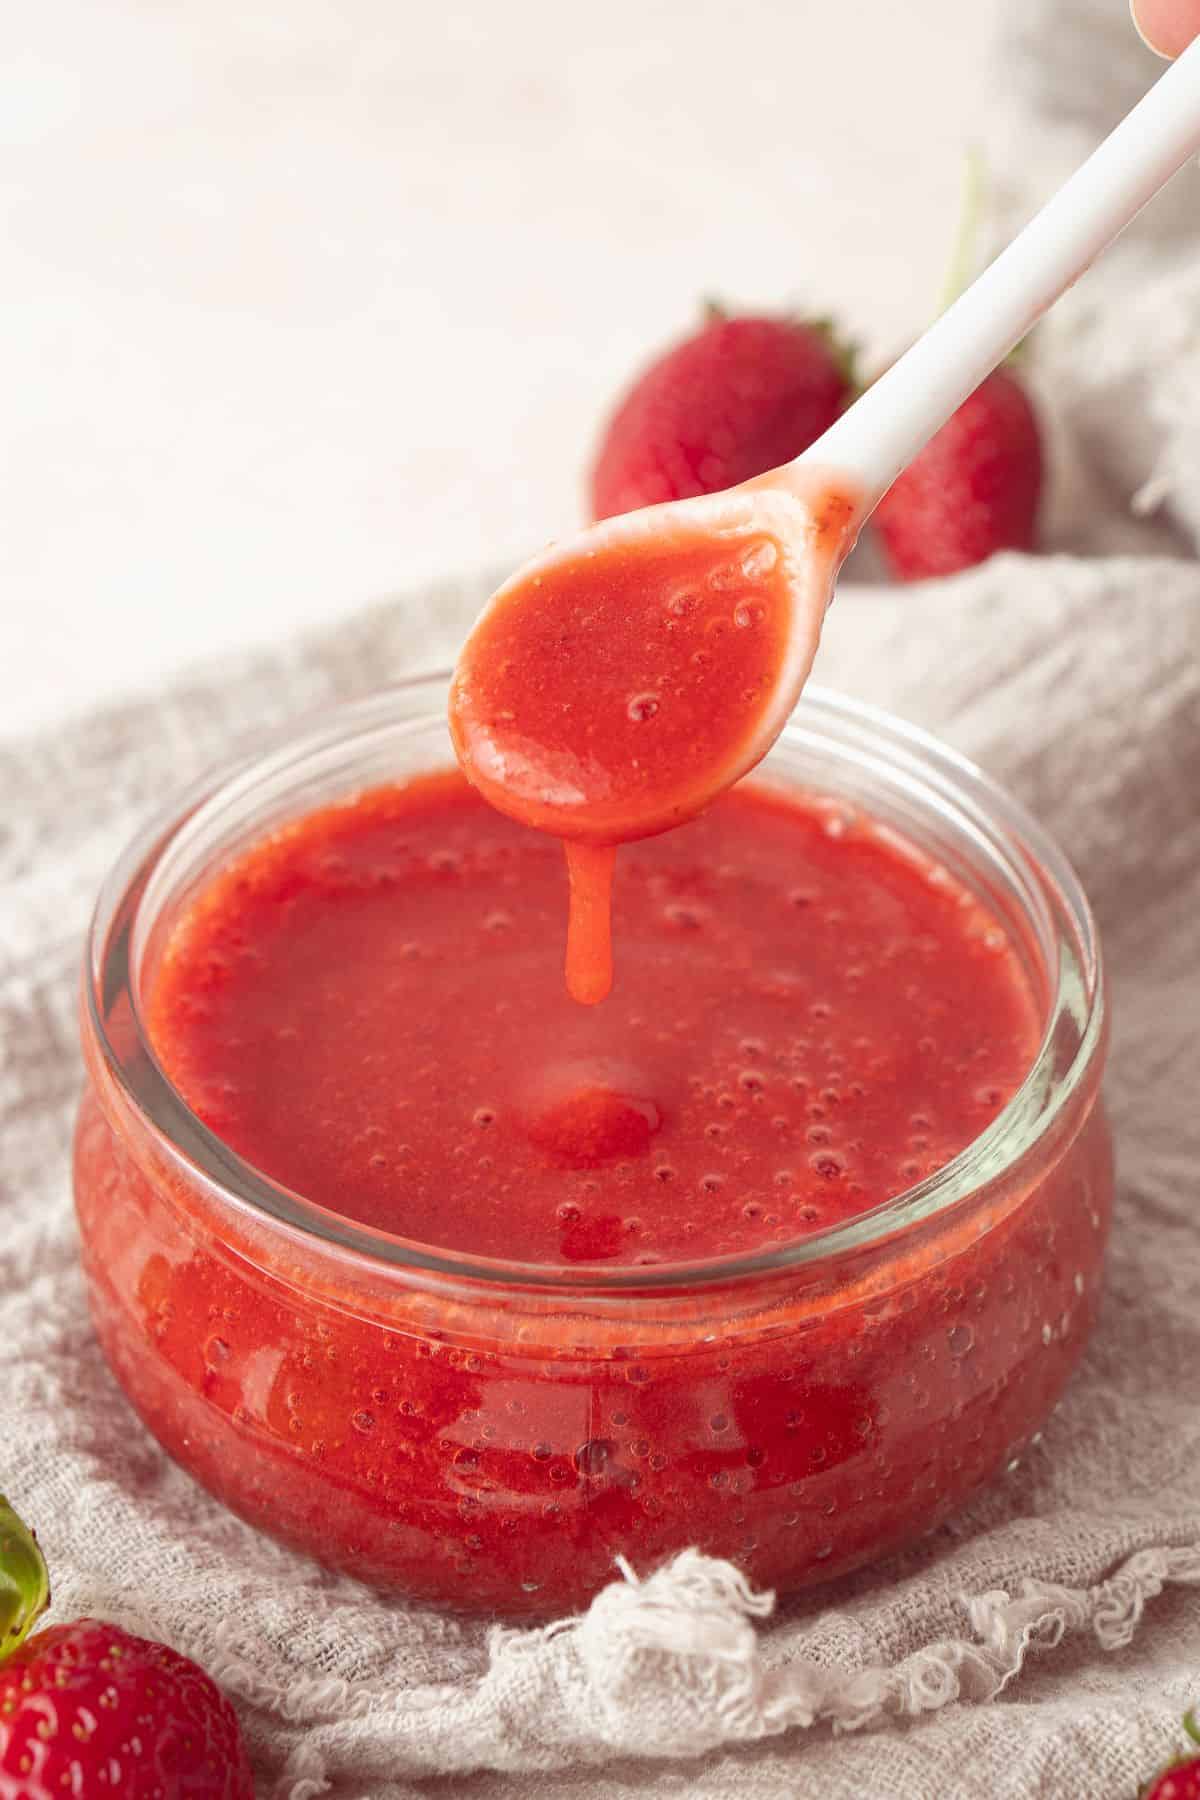 Small round glass dish of Strawberry Sauce, sitting on a cloth, with a white spoon lifting some sauce out of the dish.